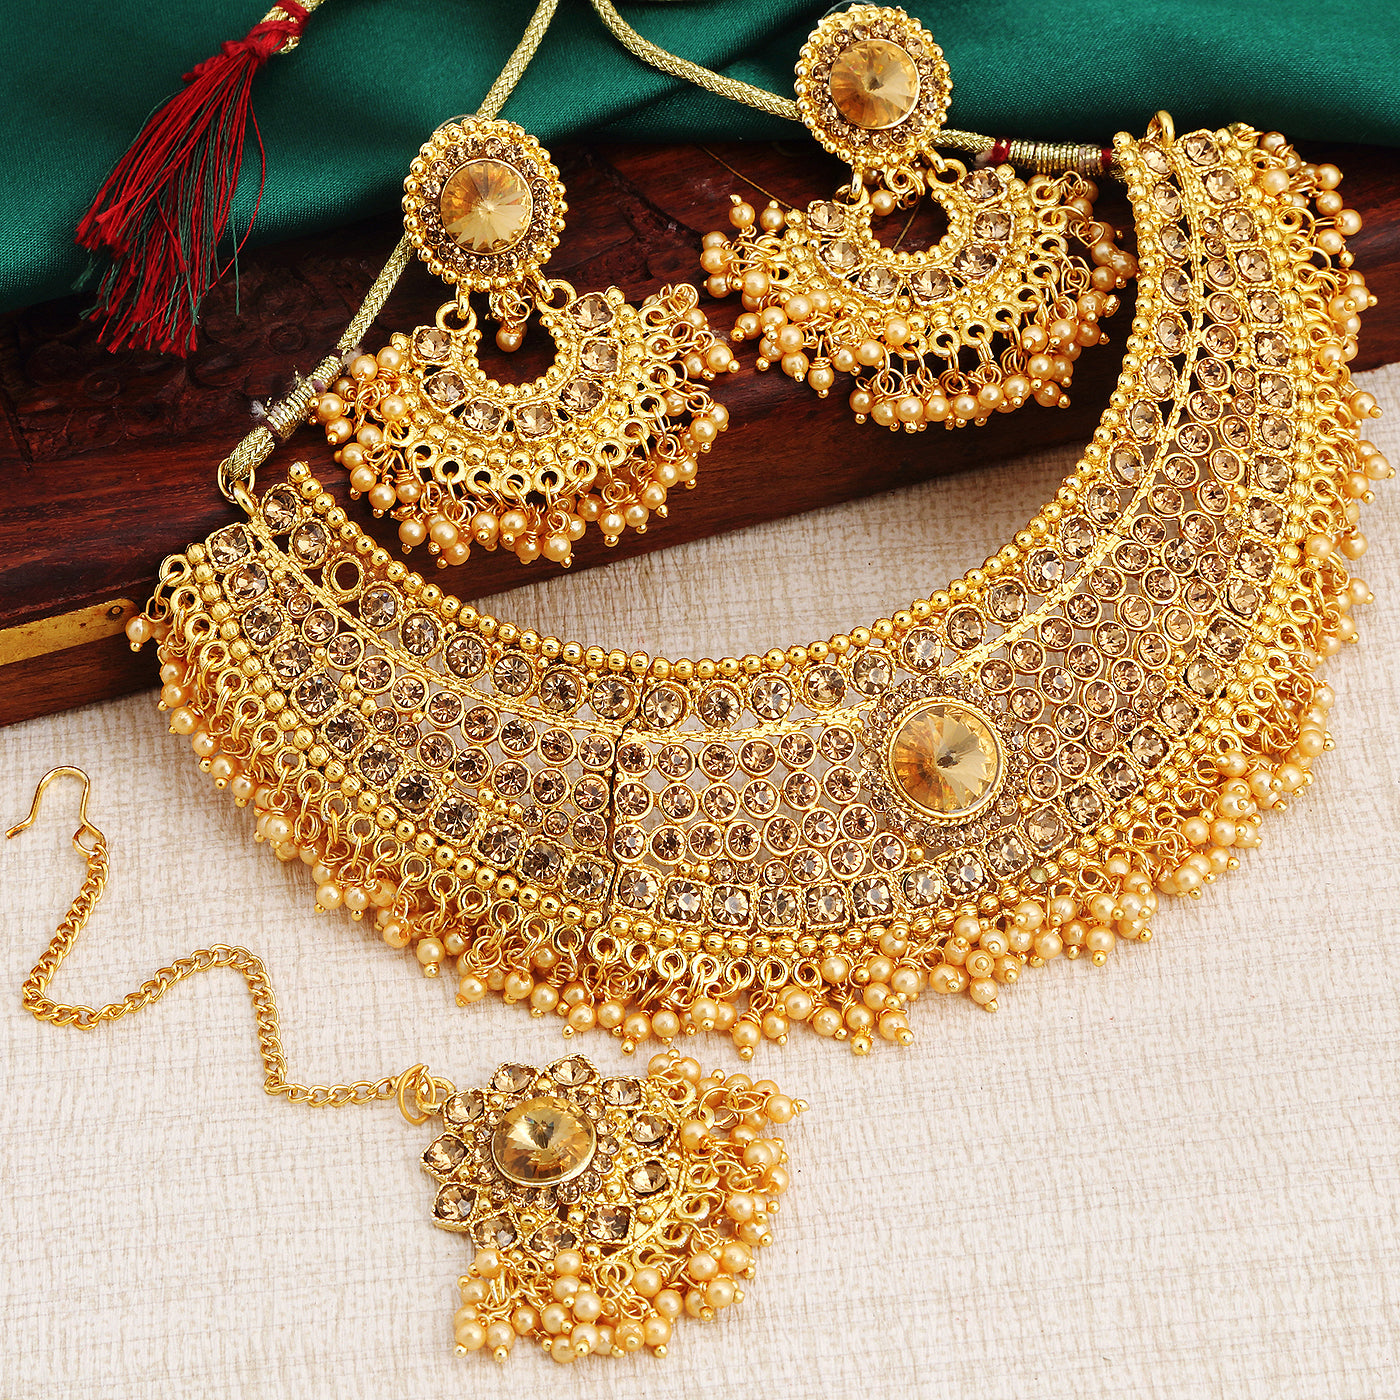 22K Gold Necklace Set in beads and flowers with Drop Earrings - NS-5945